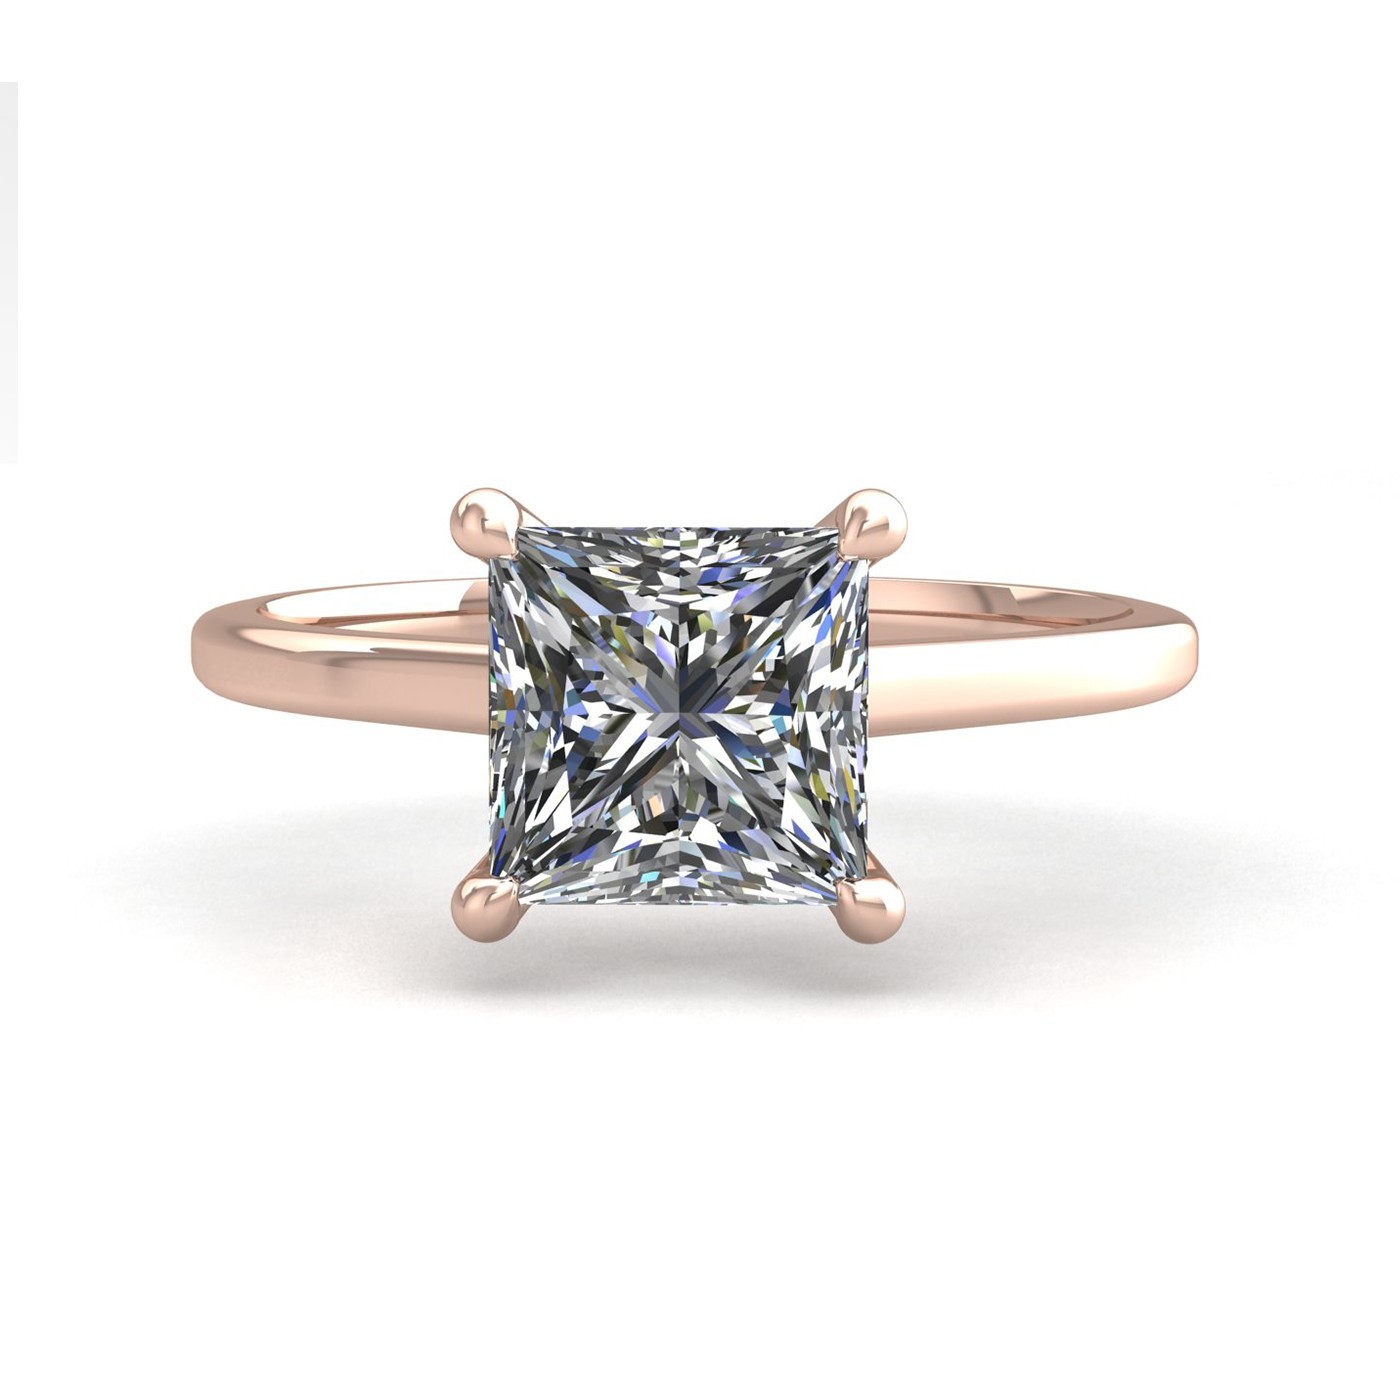 18k rose gold  2,00 ct 4 prongs solitaire princess cut diamond engagement ring with whisper thin band Photos & images